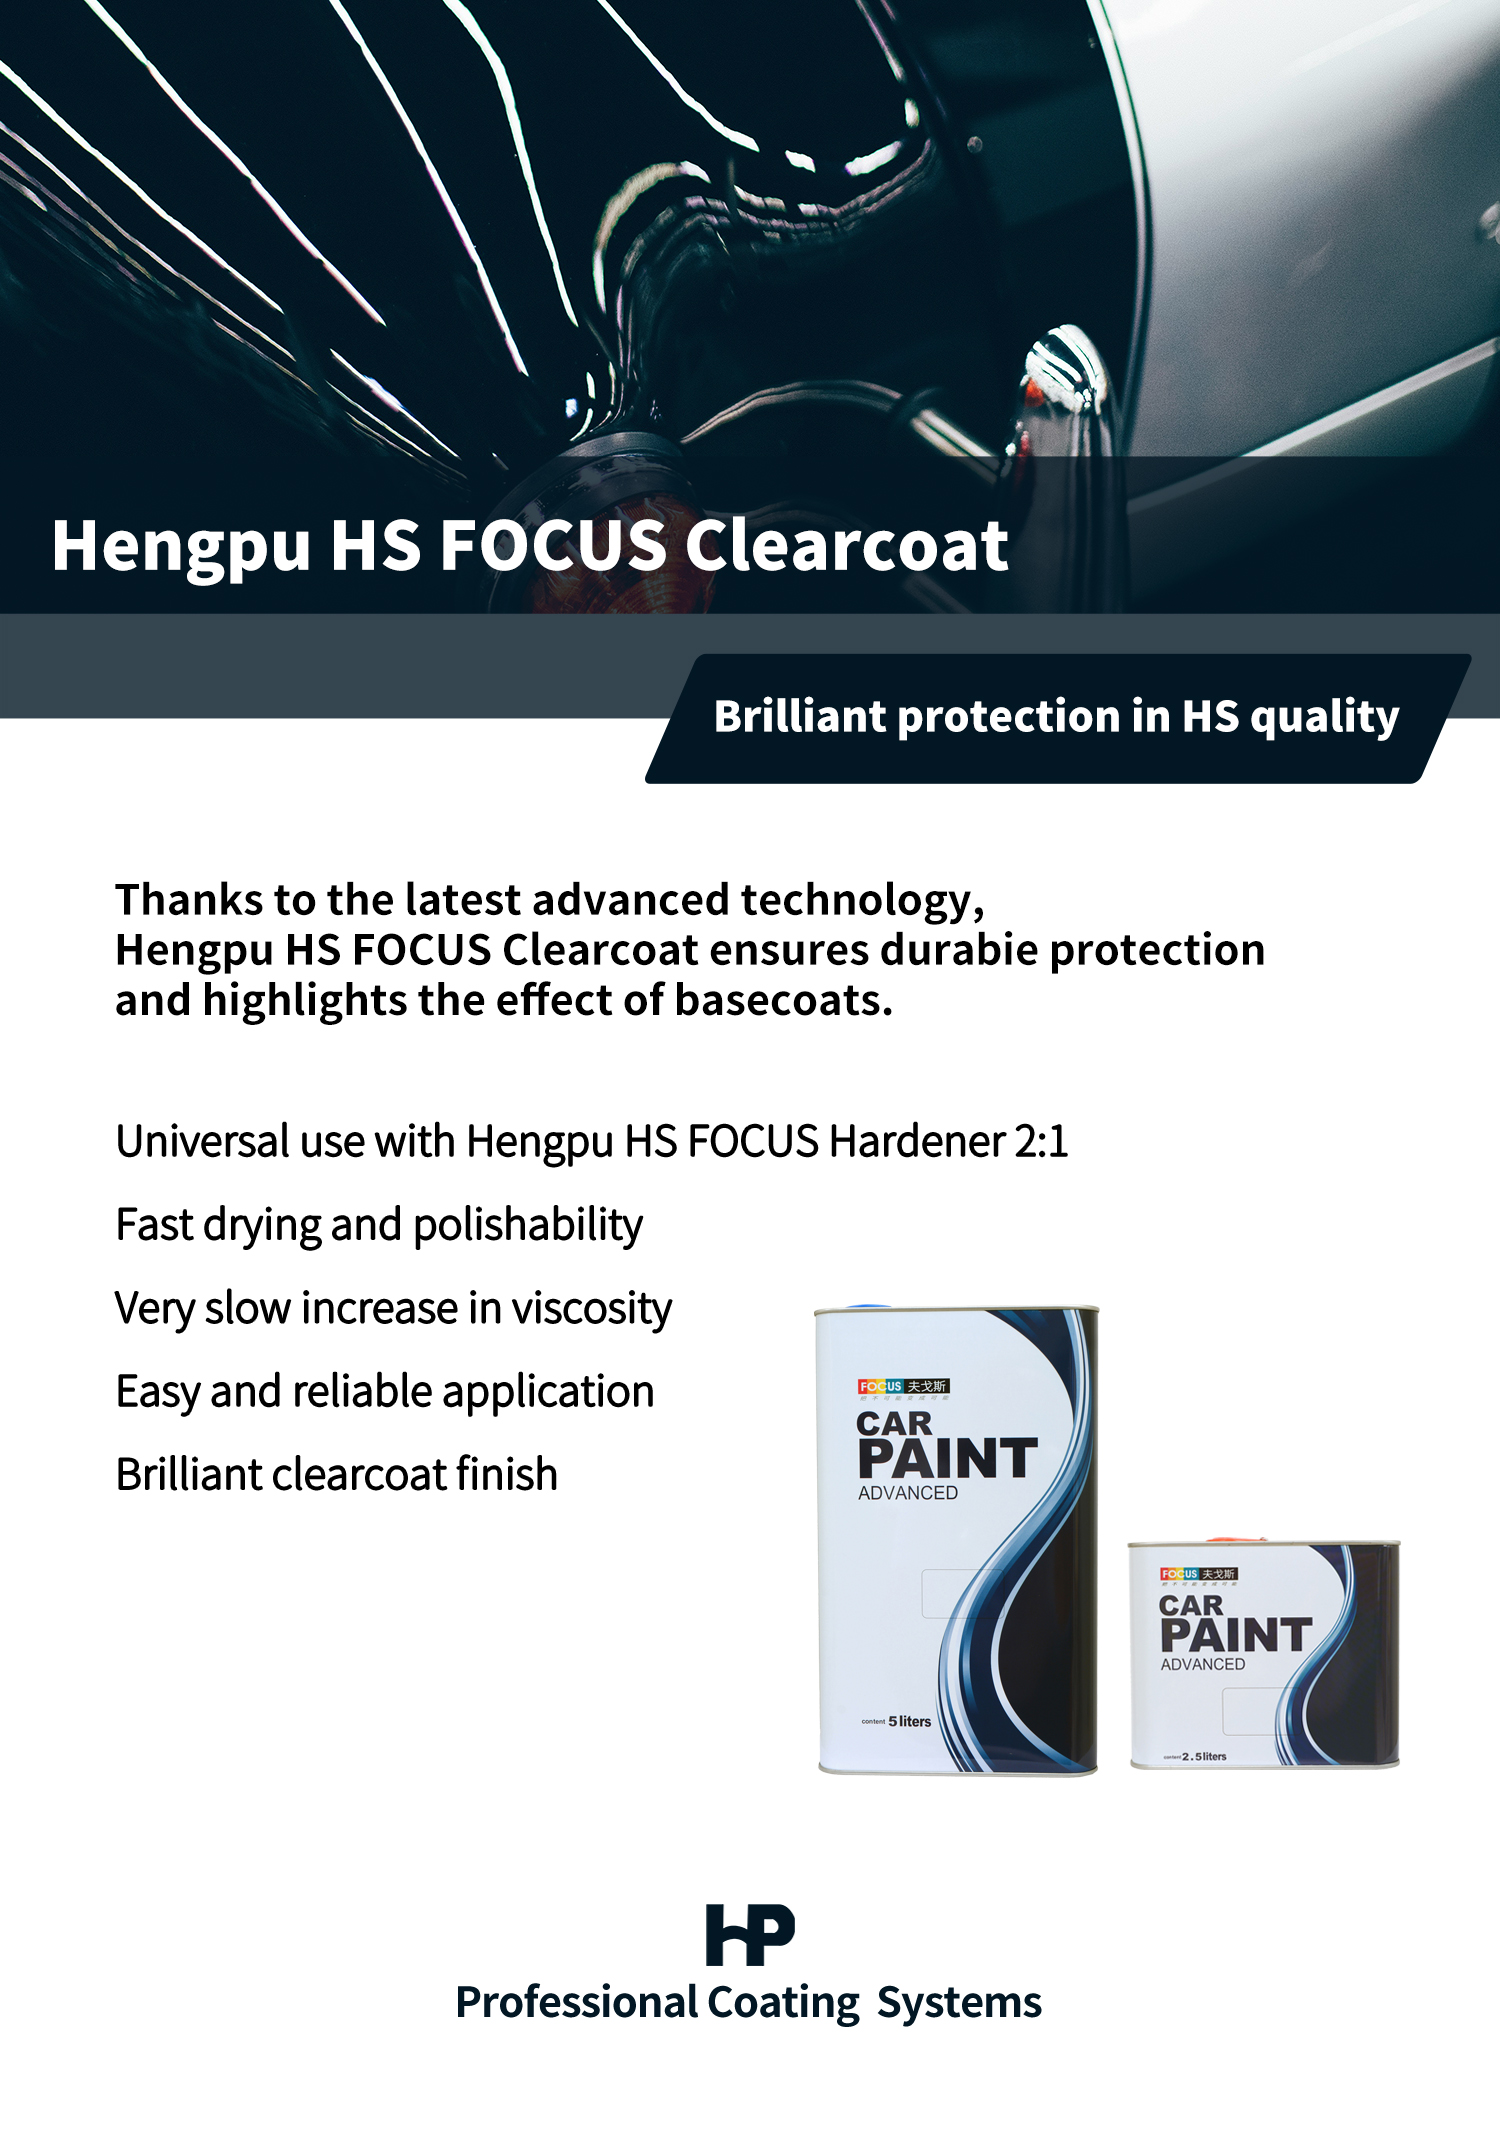 High Application High Gloss Auto Paint Easy Operation High Plumpness Car Paint Glinter HS Highlighting Clearcoat